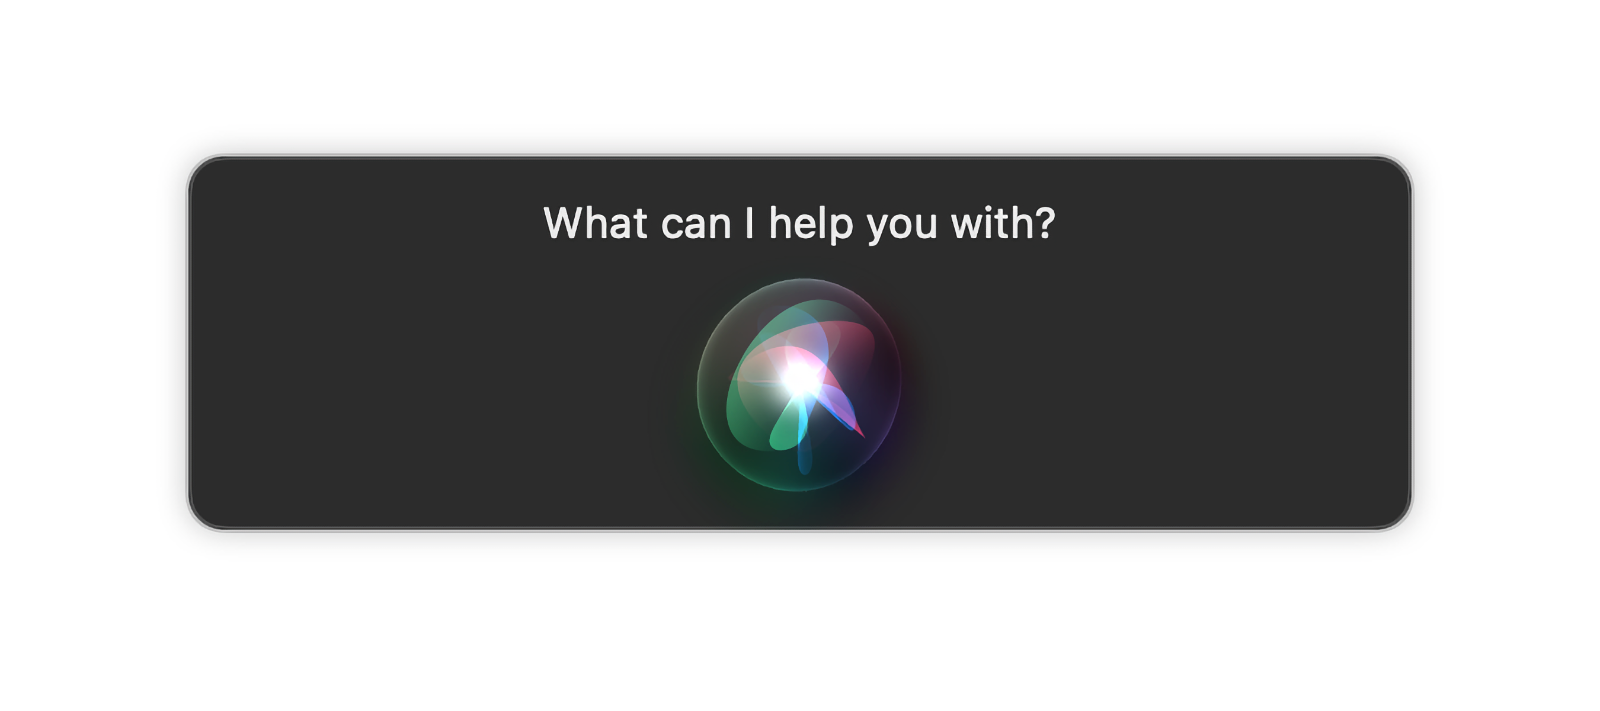 Image of the Siri icon asking 'What can I help with'